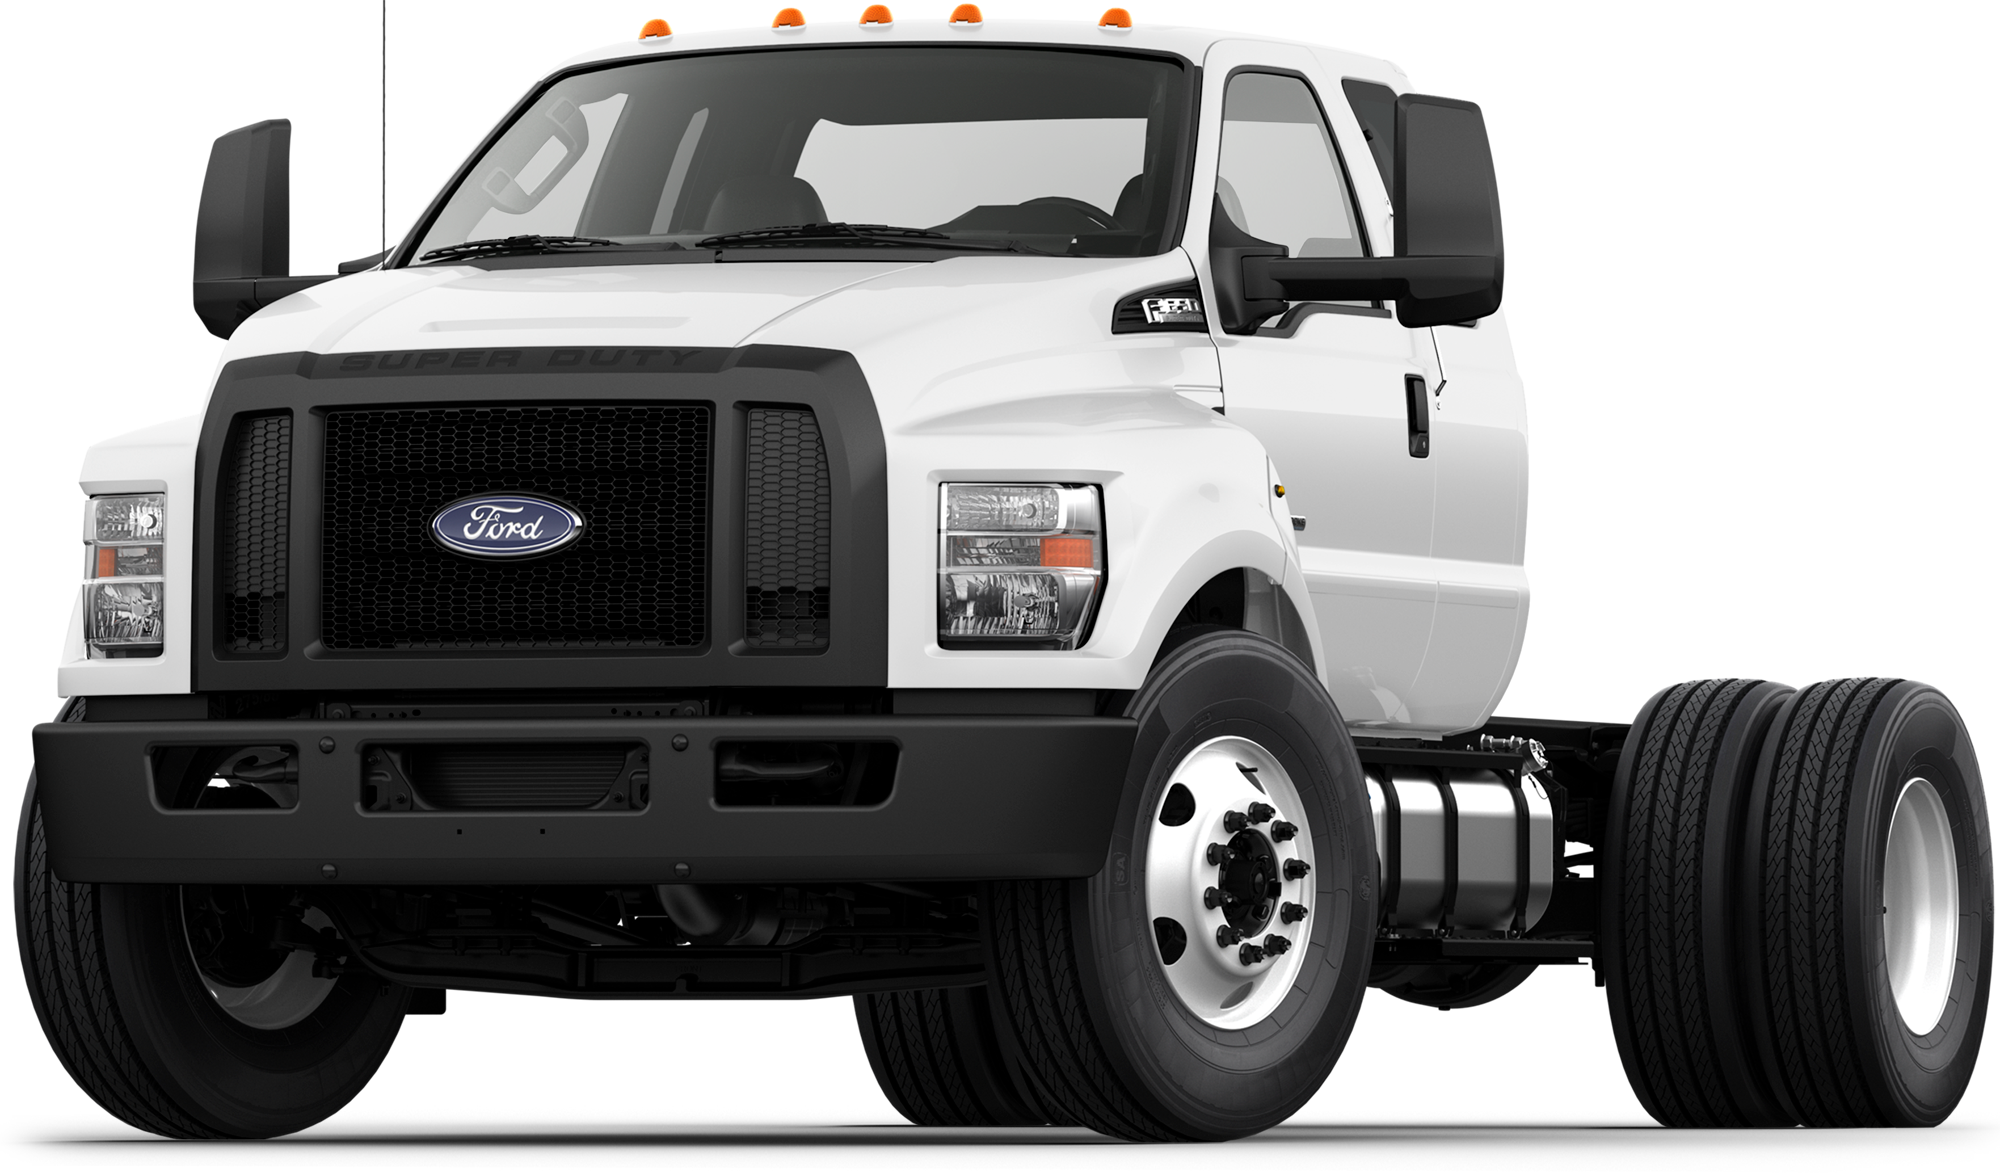 2022 Ford F650 Diesel Incentives, Specials & Offers in Minneapolis MN